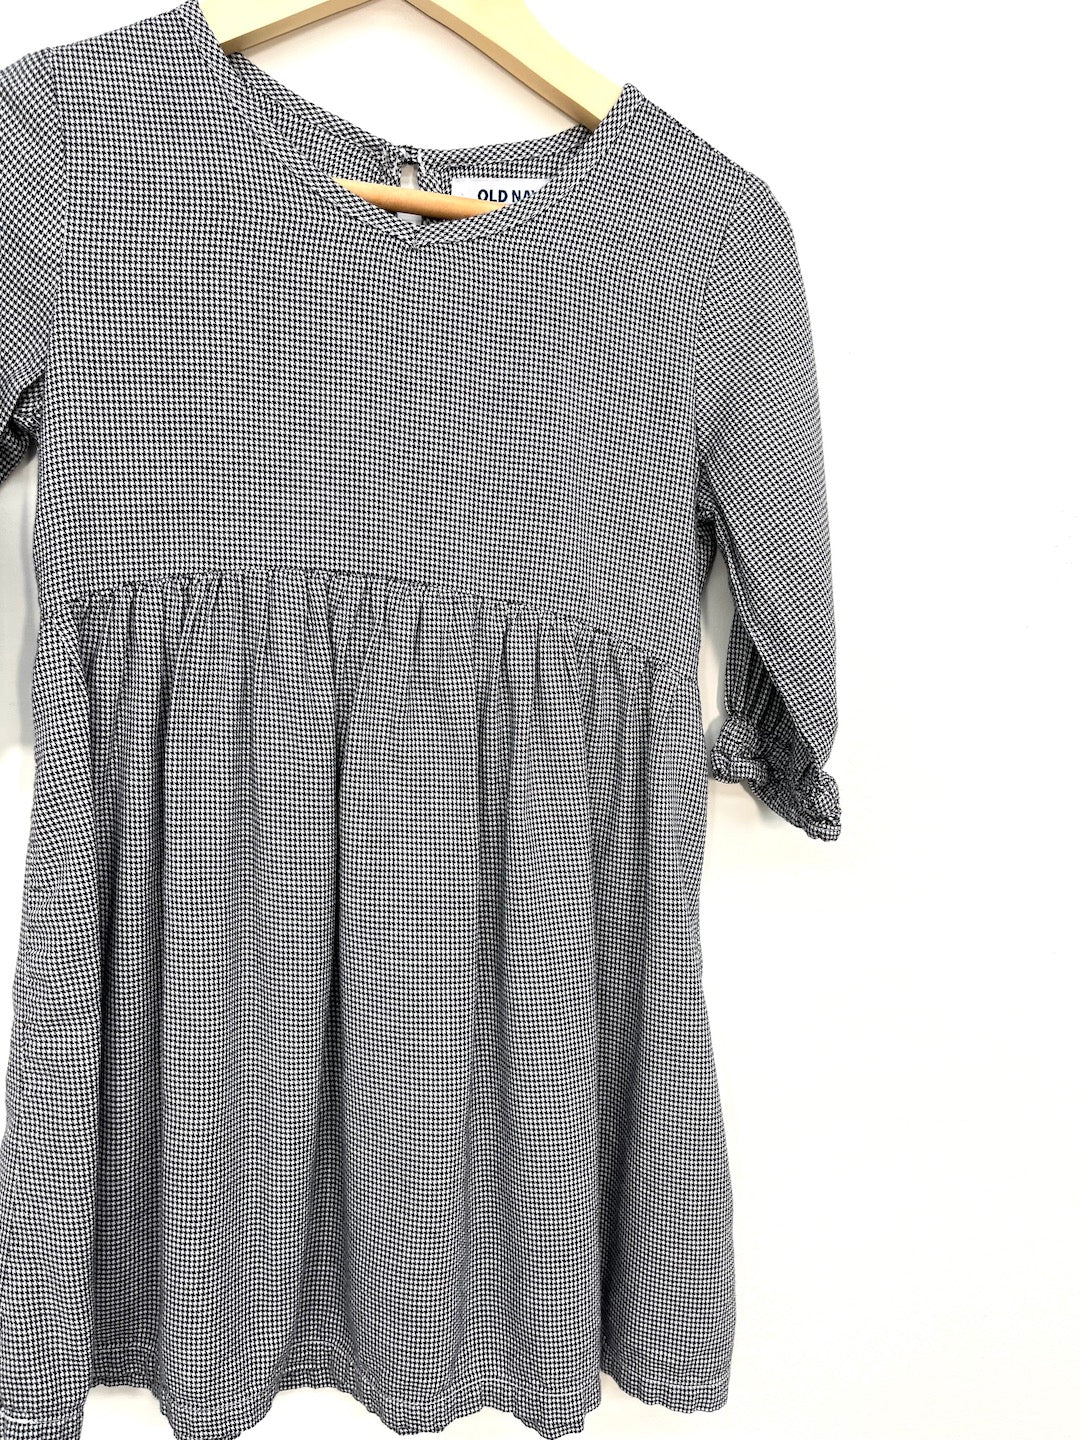 old navy houndtooth dress 4T